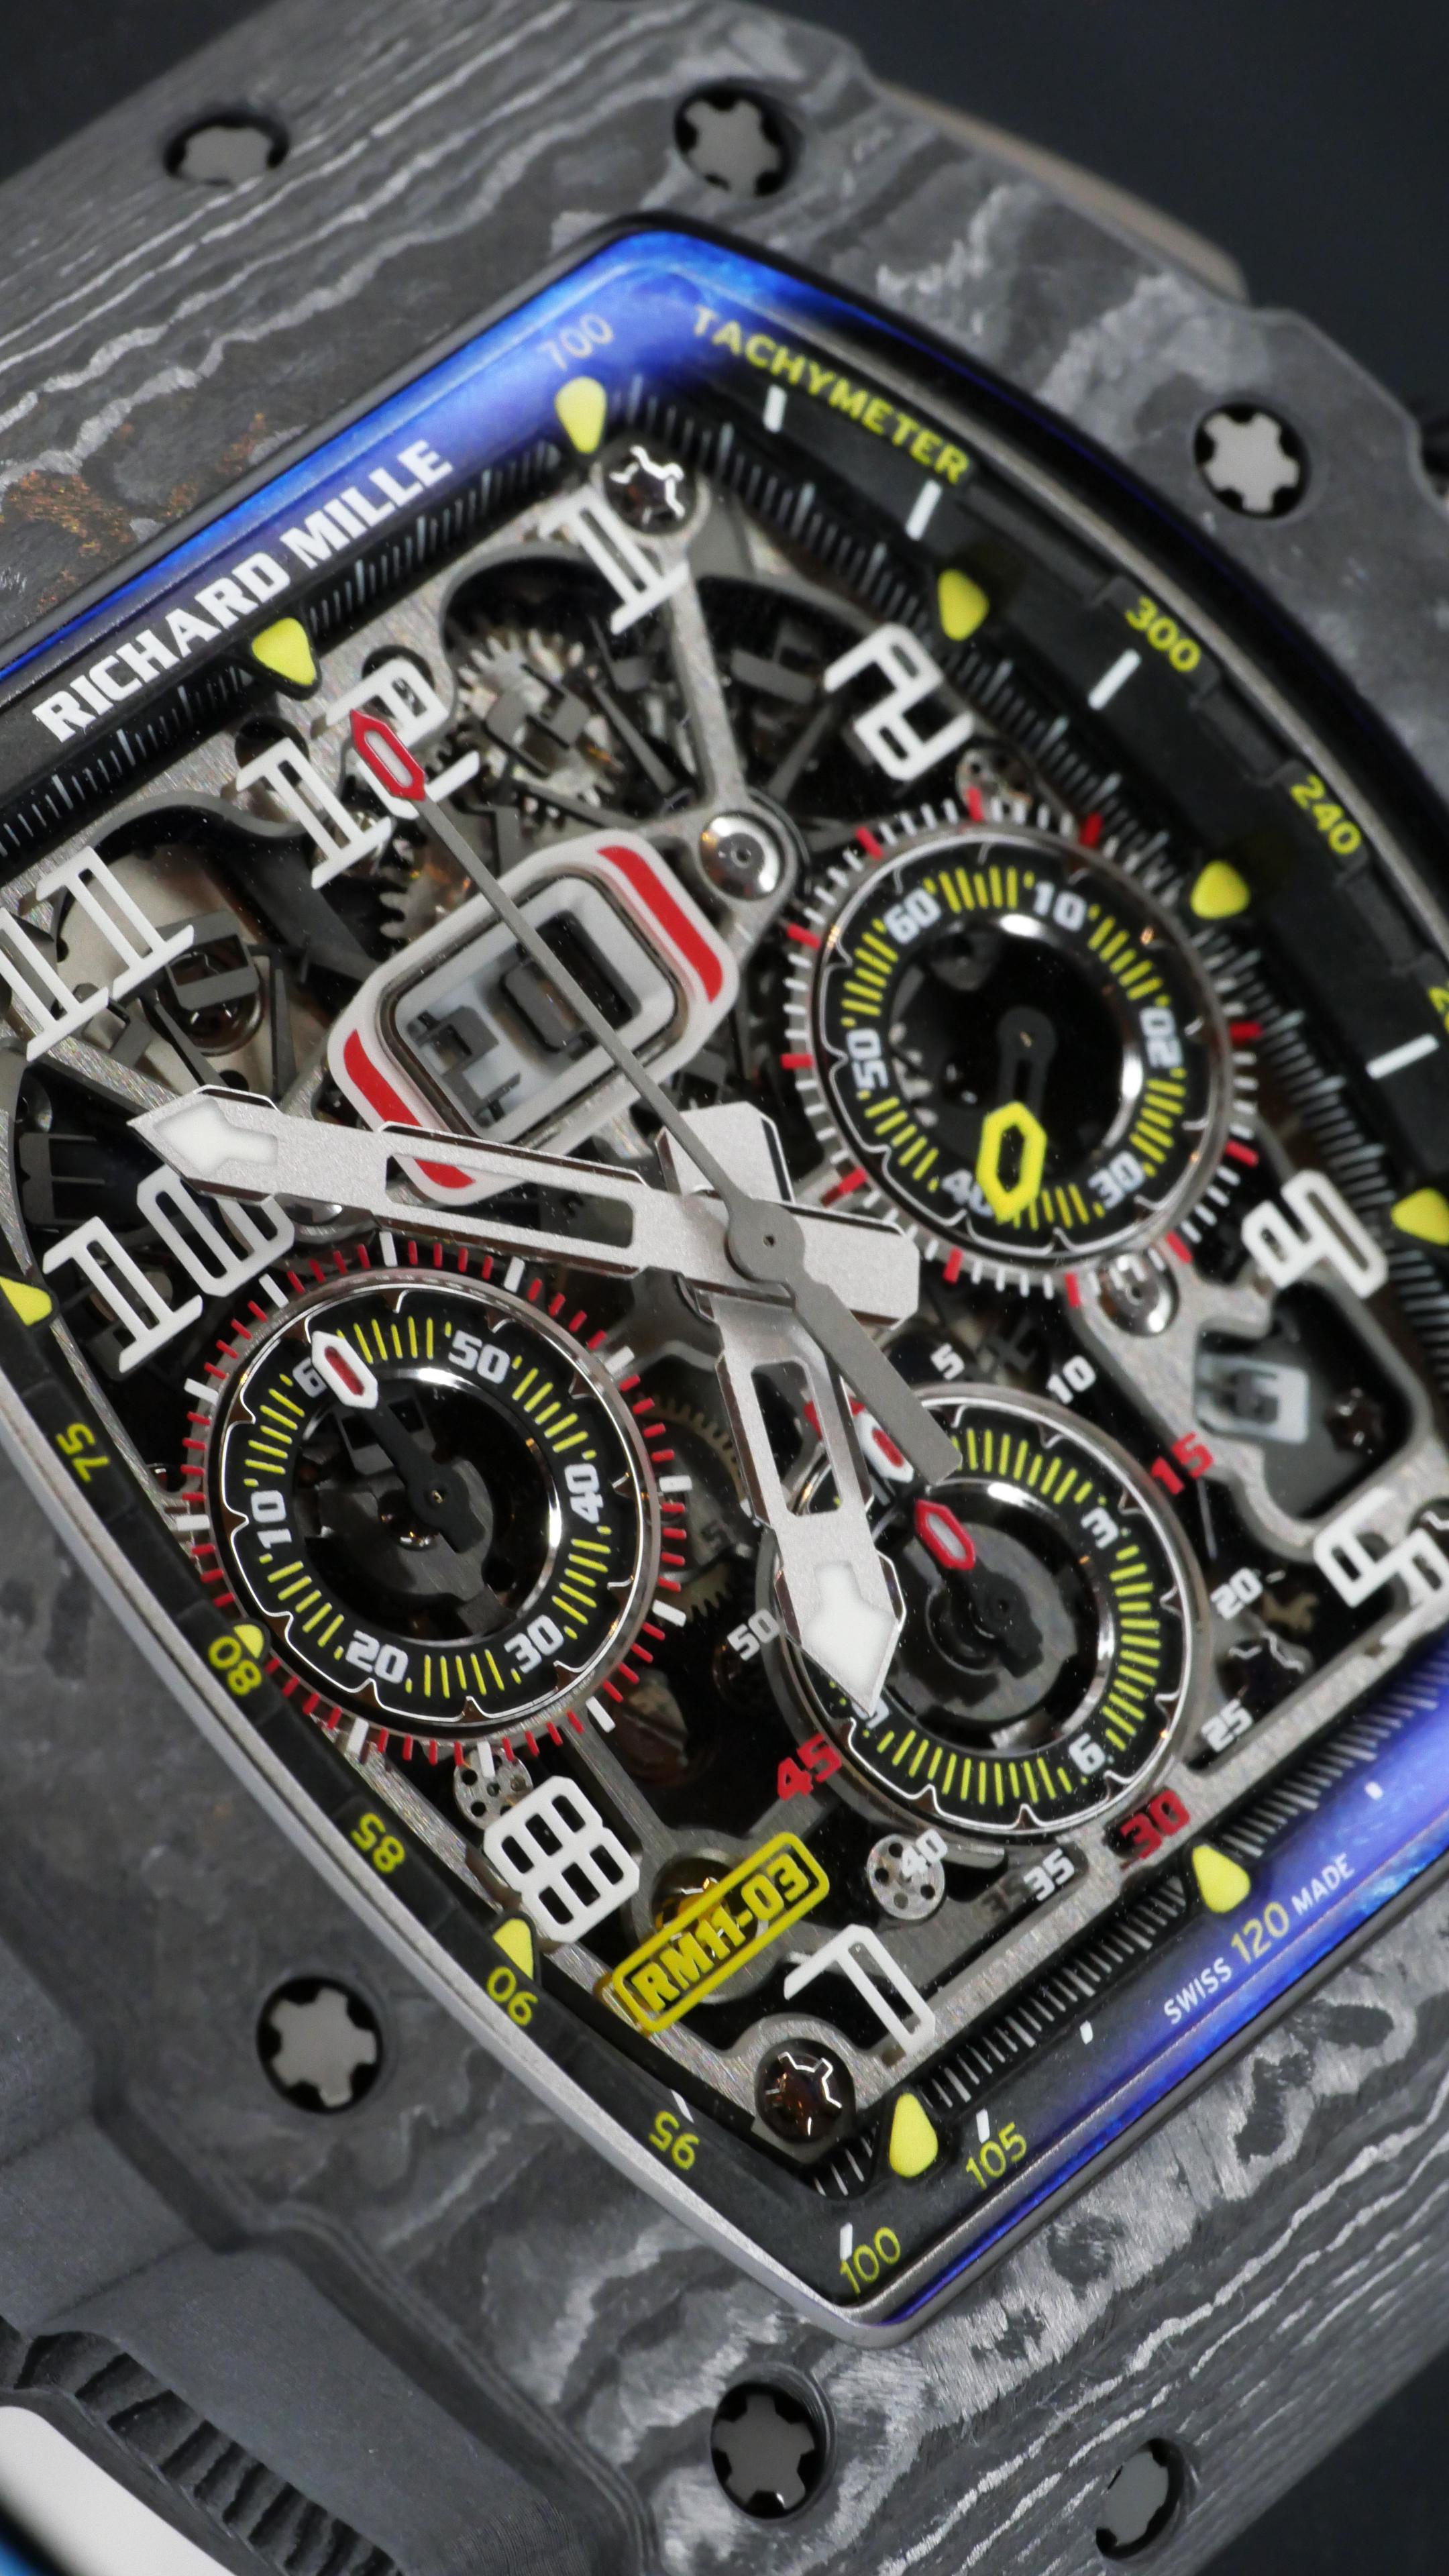 The design and execution of the RM 11-03 demonstrates a complete conceptual approach to the movement, case and dial.

The RM 011’s case is typical of Richard Mille: a tonneau shape with a curved bezel, sides and caseback. The watch is driven by a